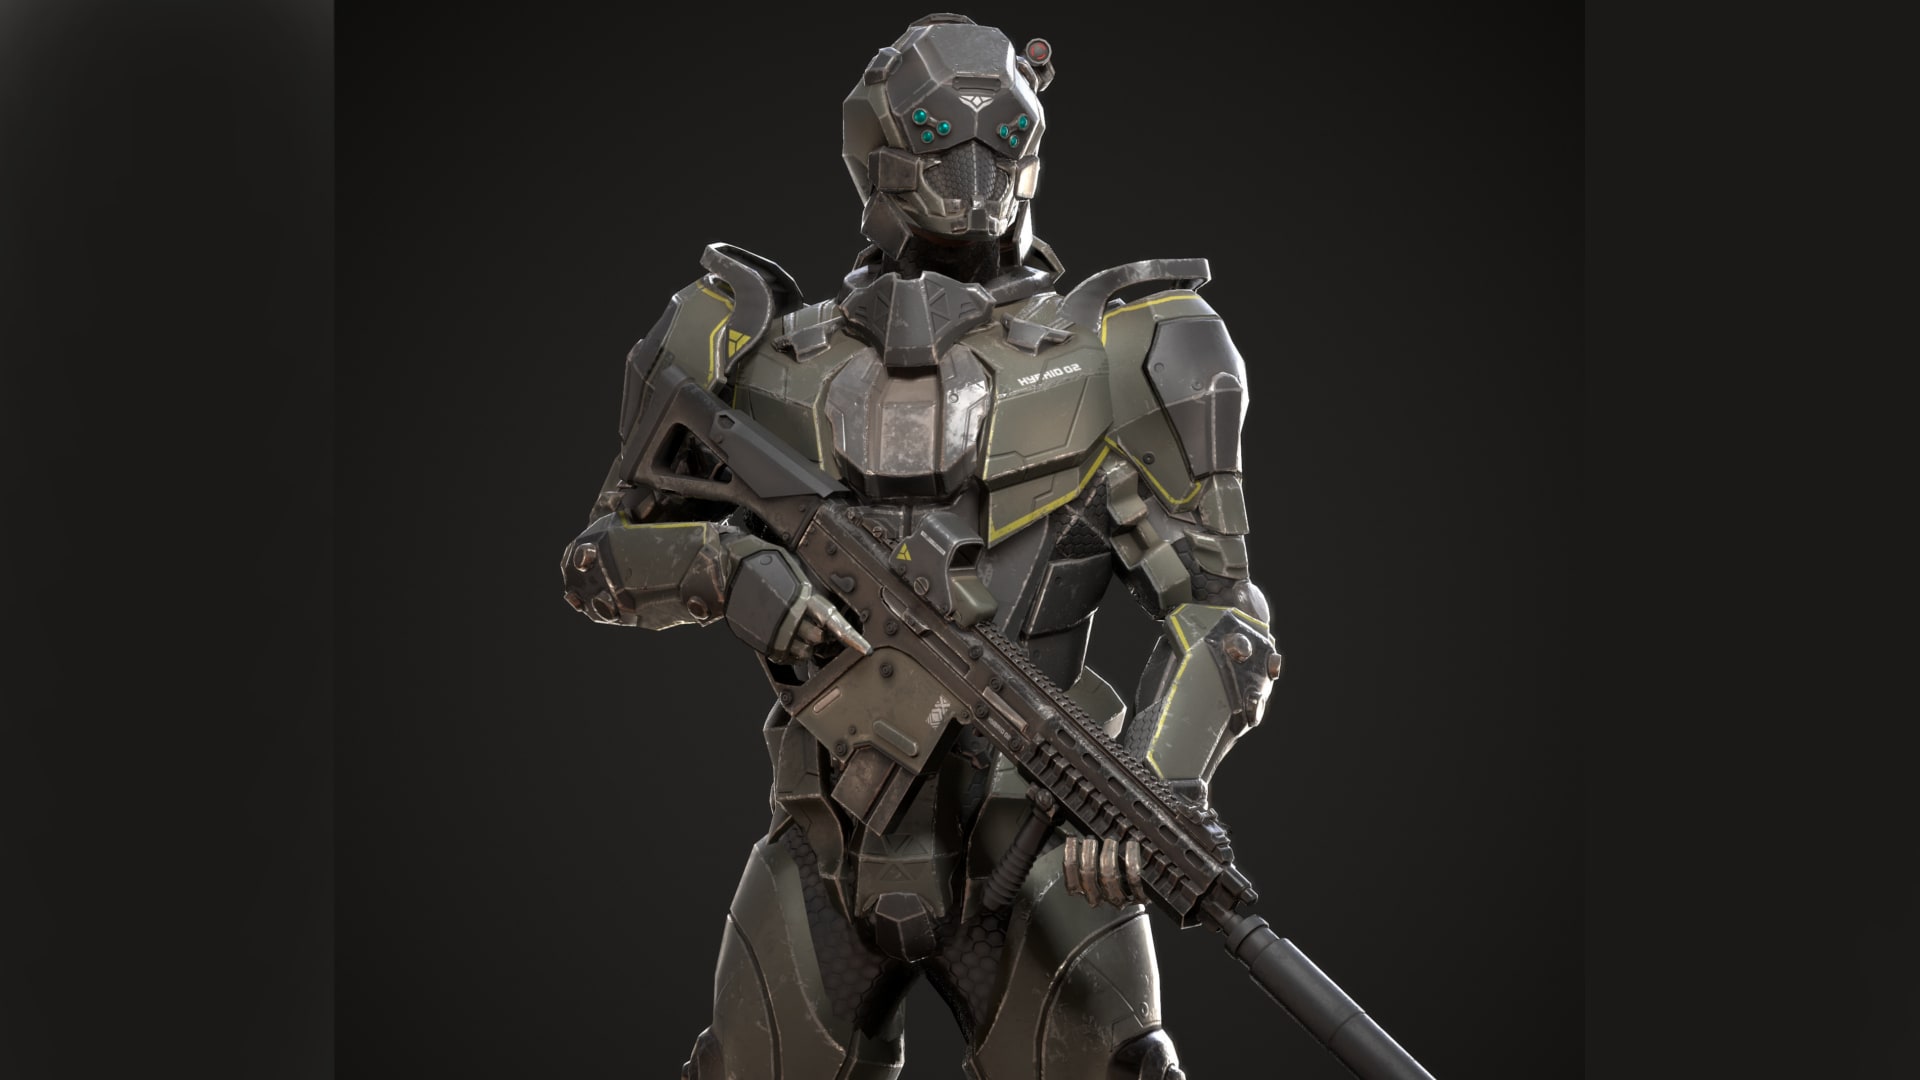 SciFi Soldier in Characters